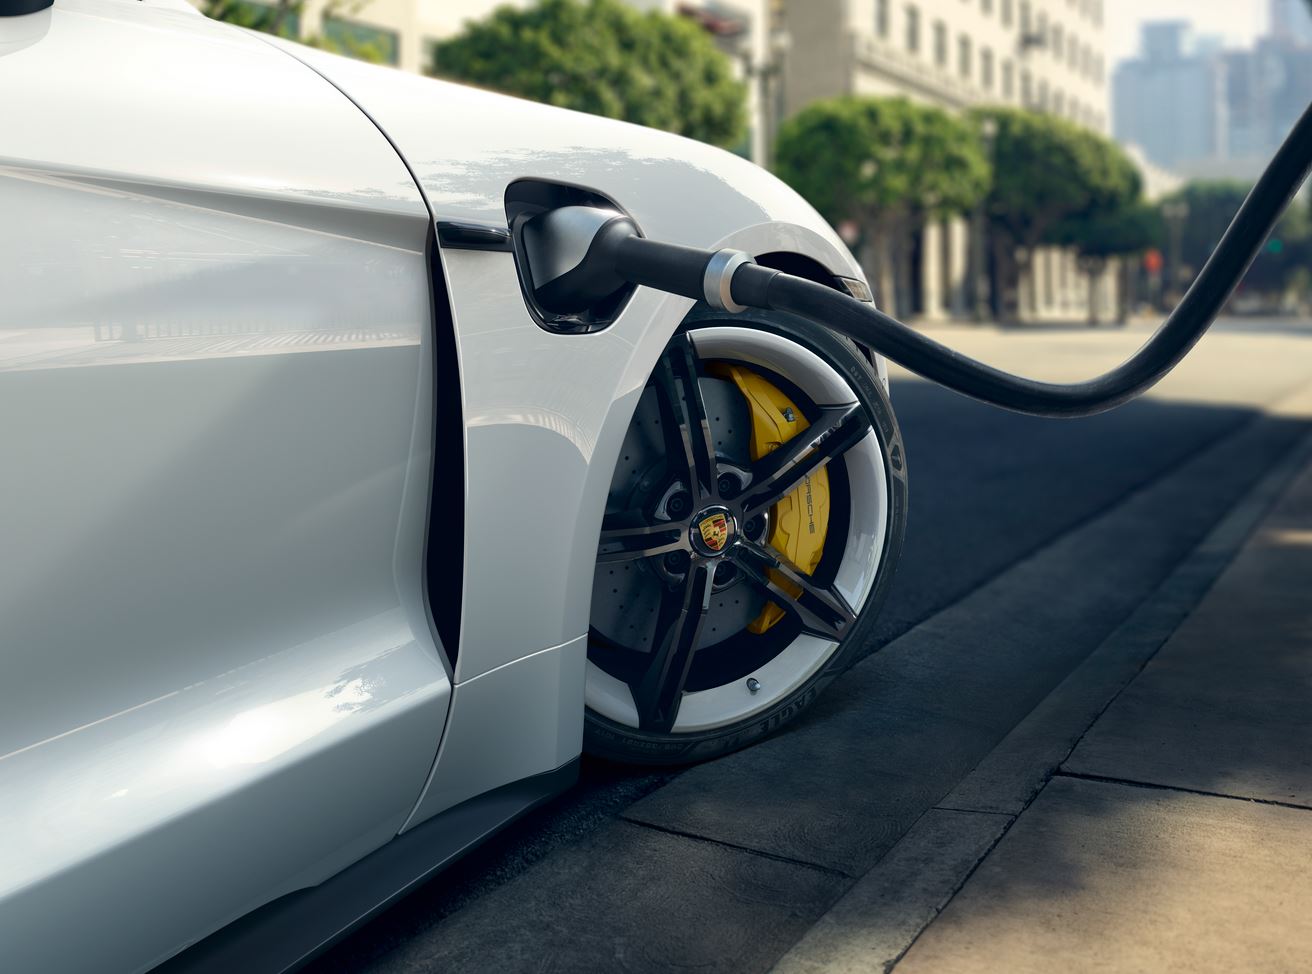 Porsche Taycan reportedly getting enhanced battery pack to improve range